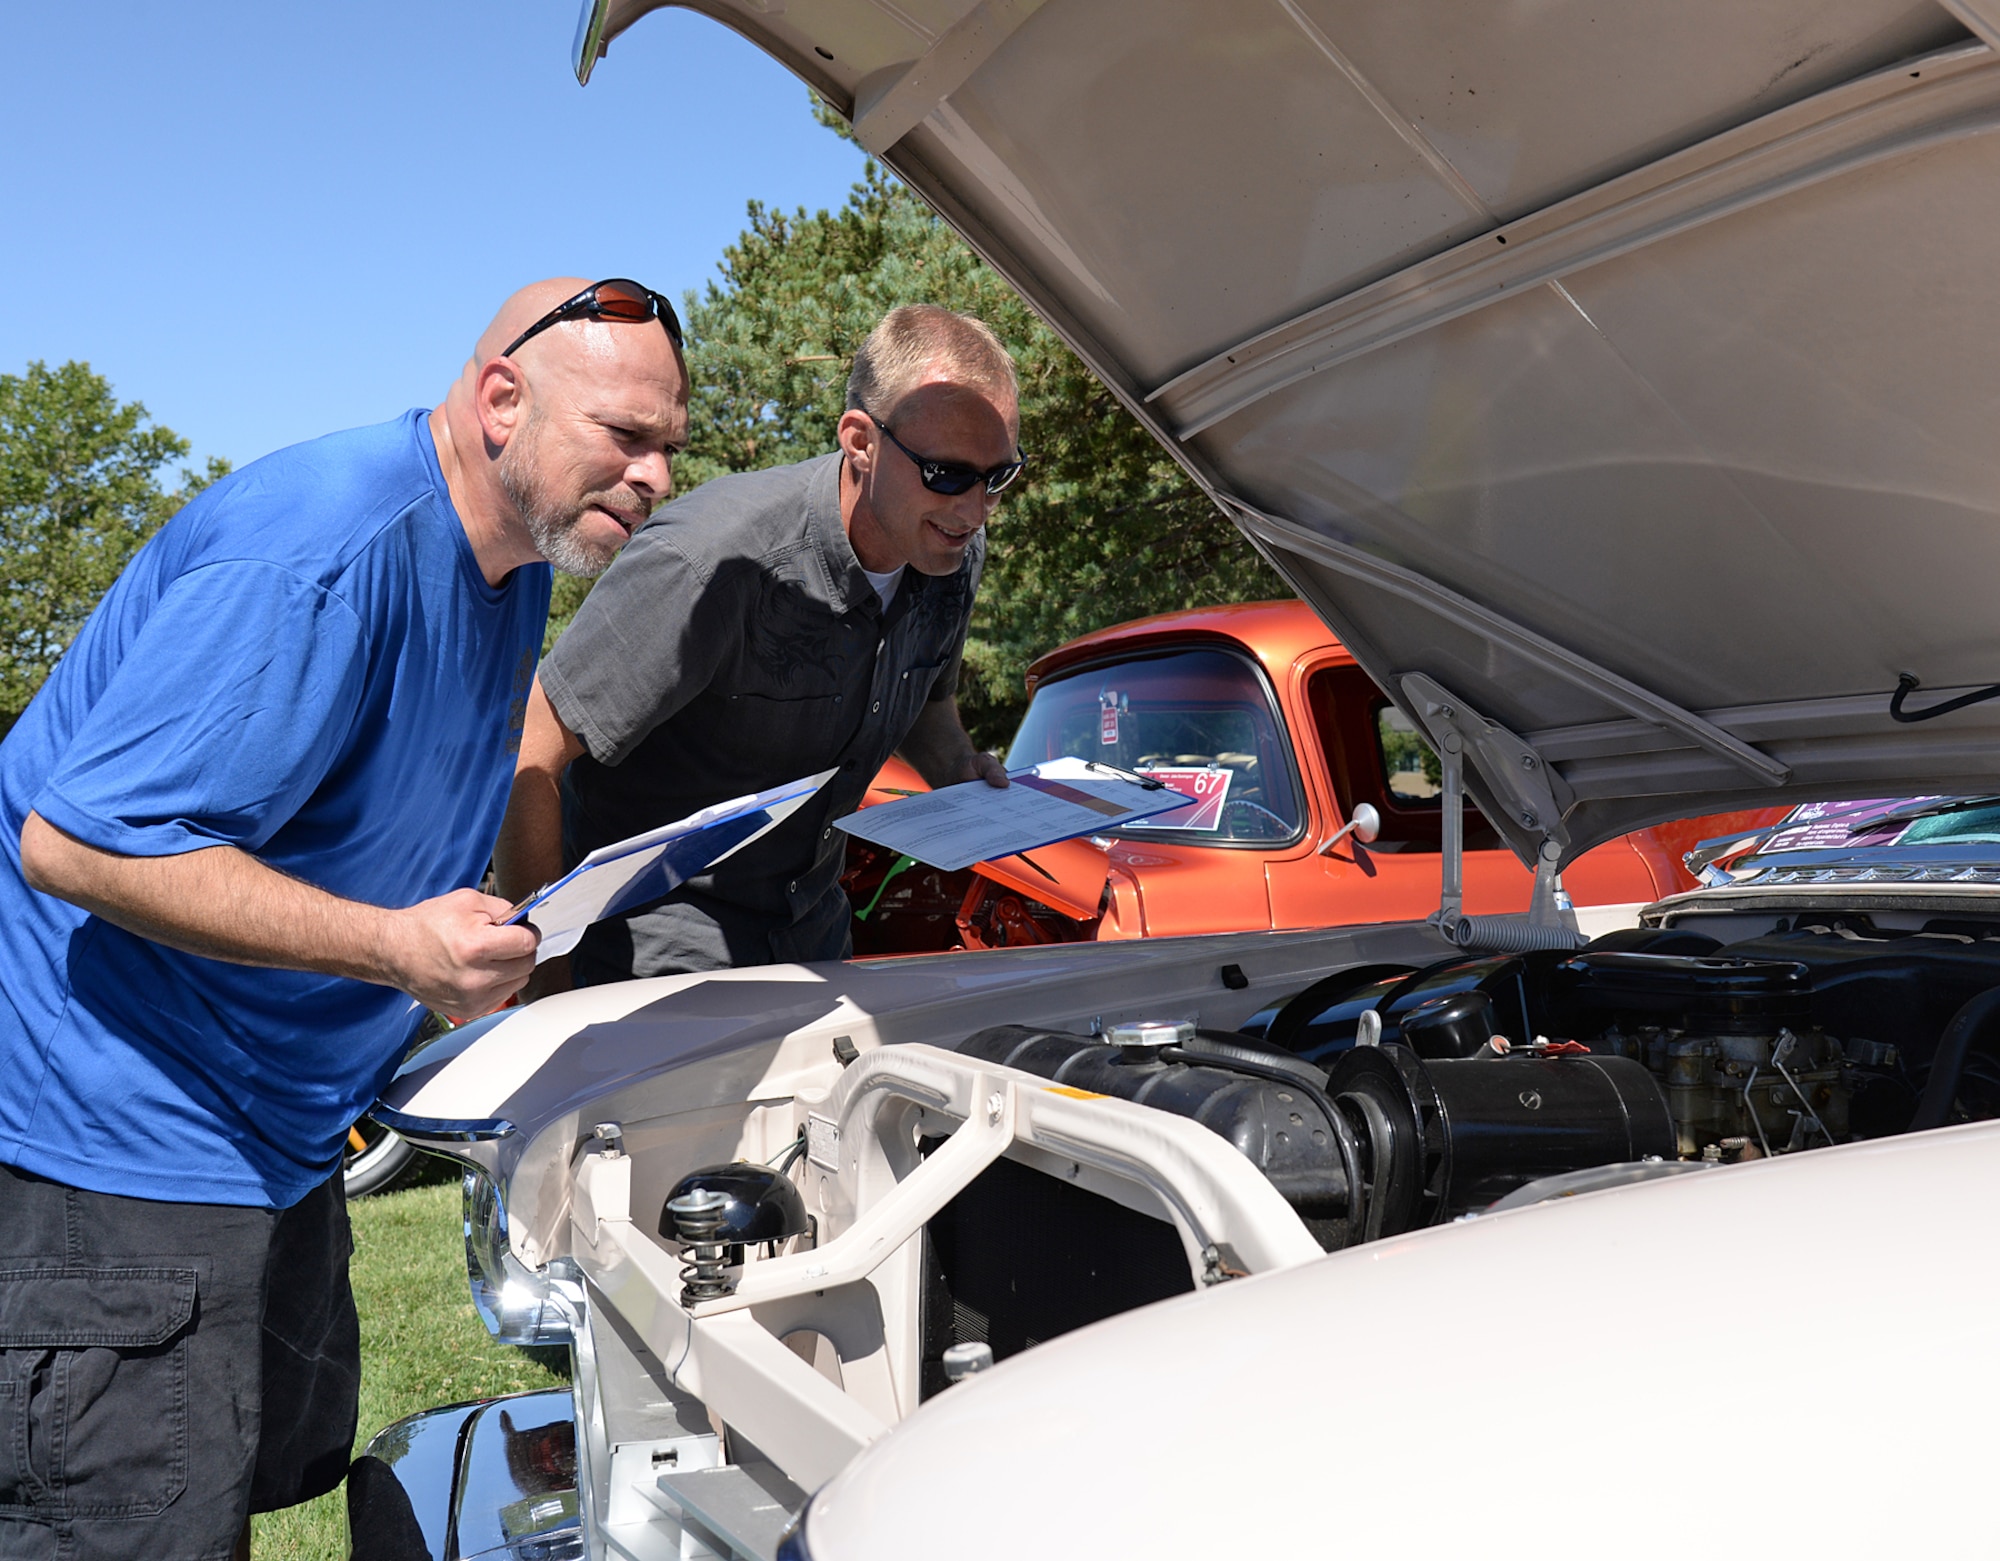 Judges Jason Carrion and John Sowder inspect the original 392 Hemi-engine on a 1957 Chrystal Imperial LeBaron owned by Jerry England. (U.S. Air Force photo by Alex R. Lloyd)